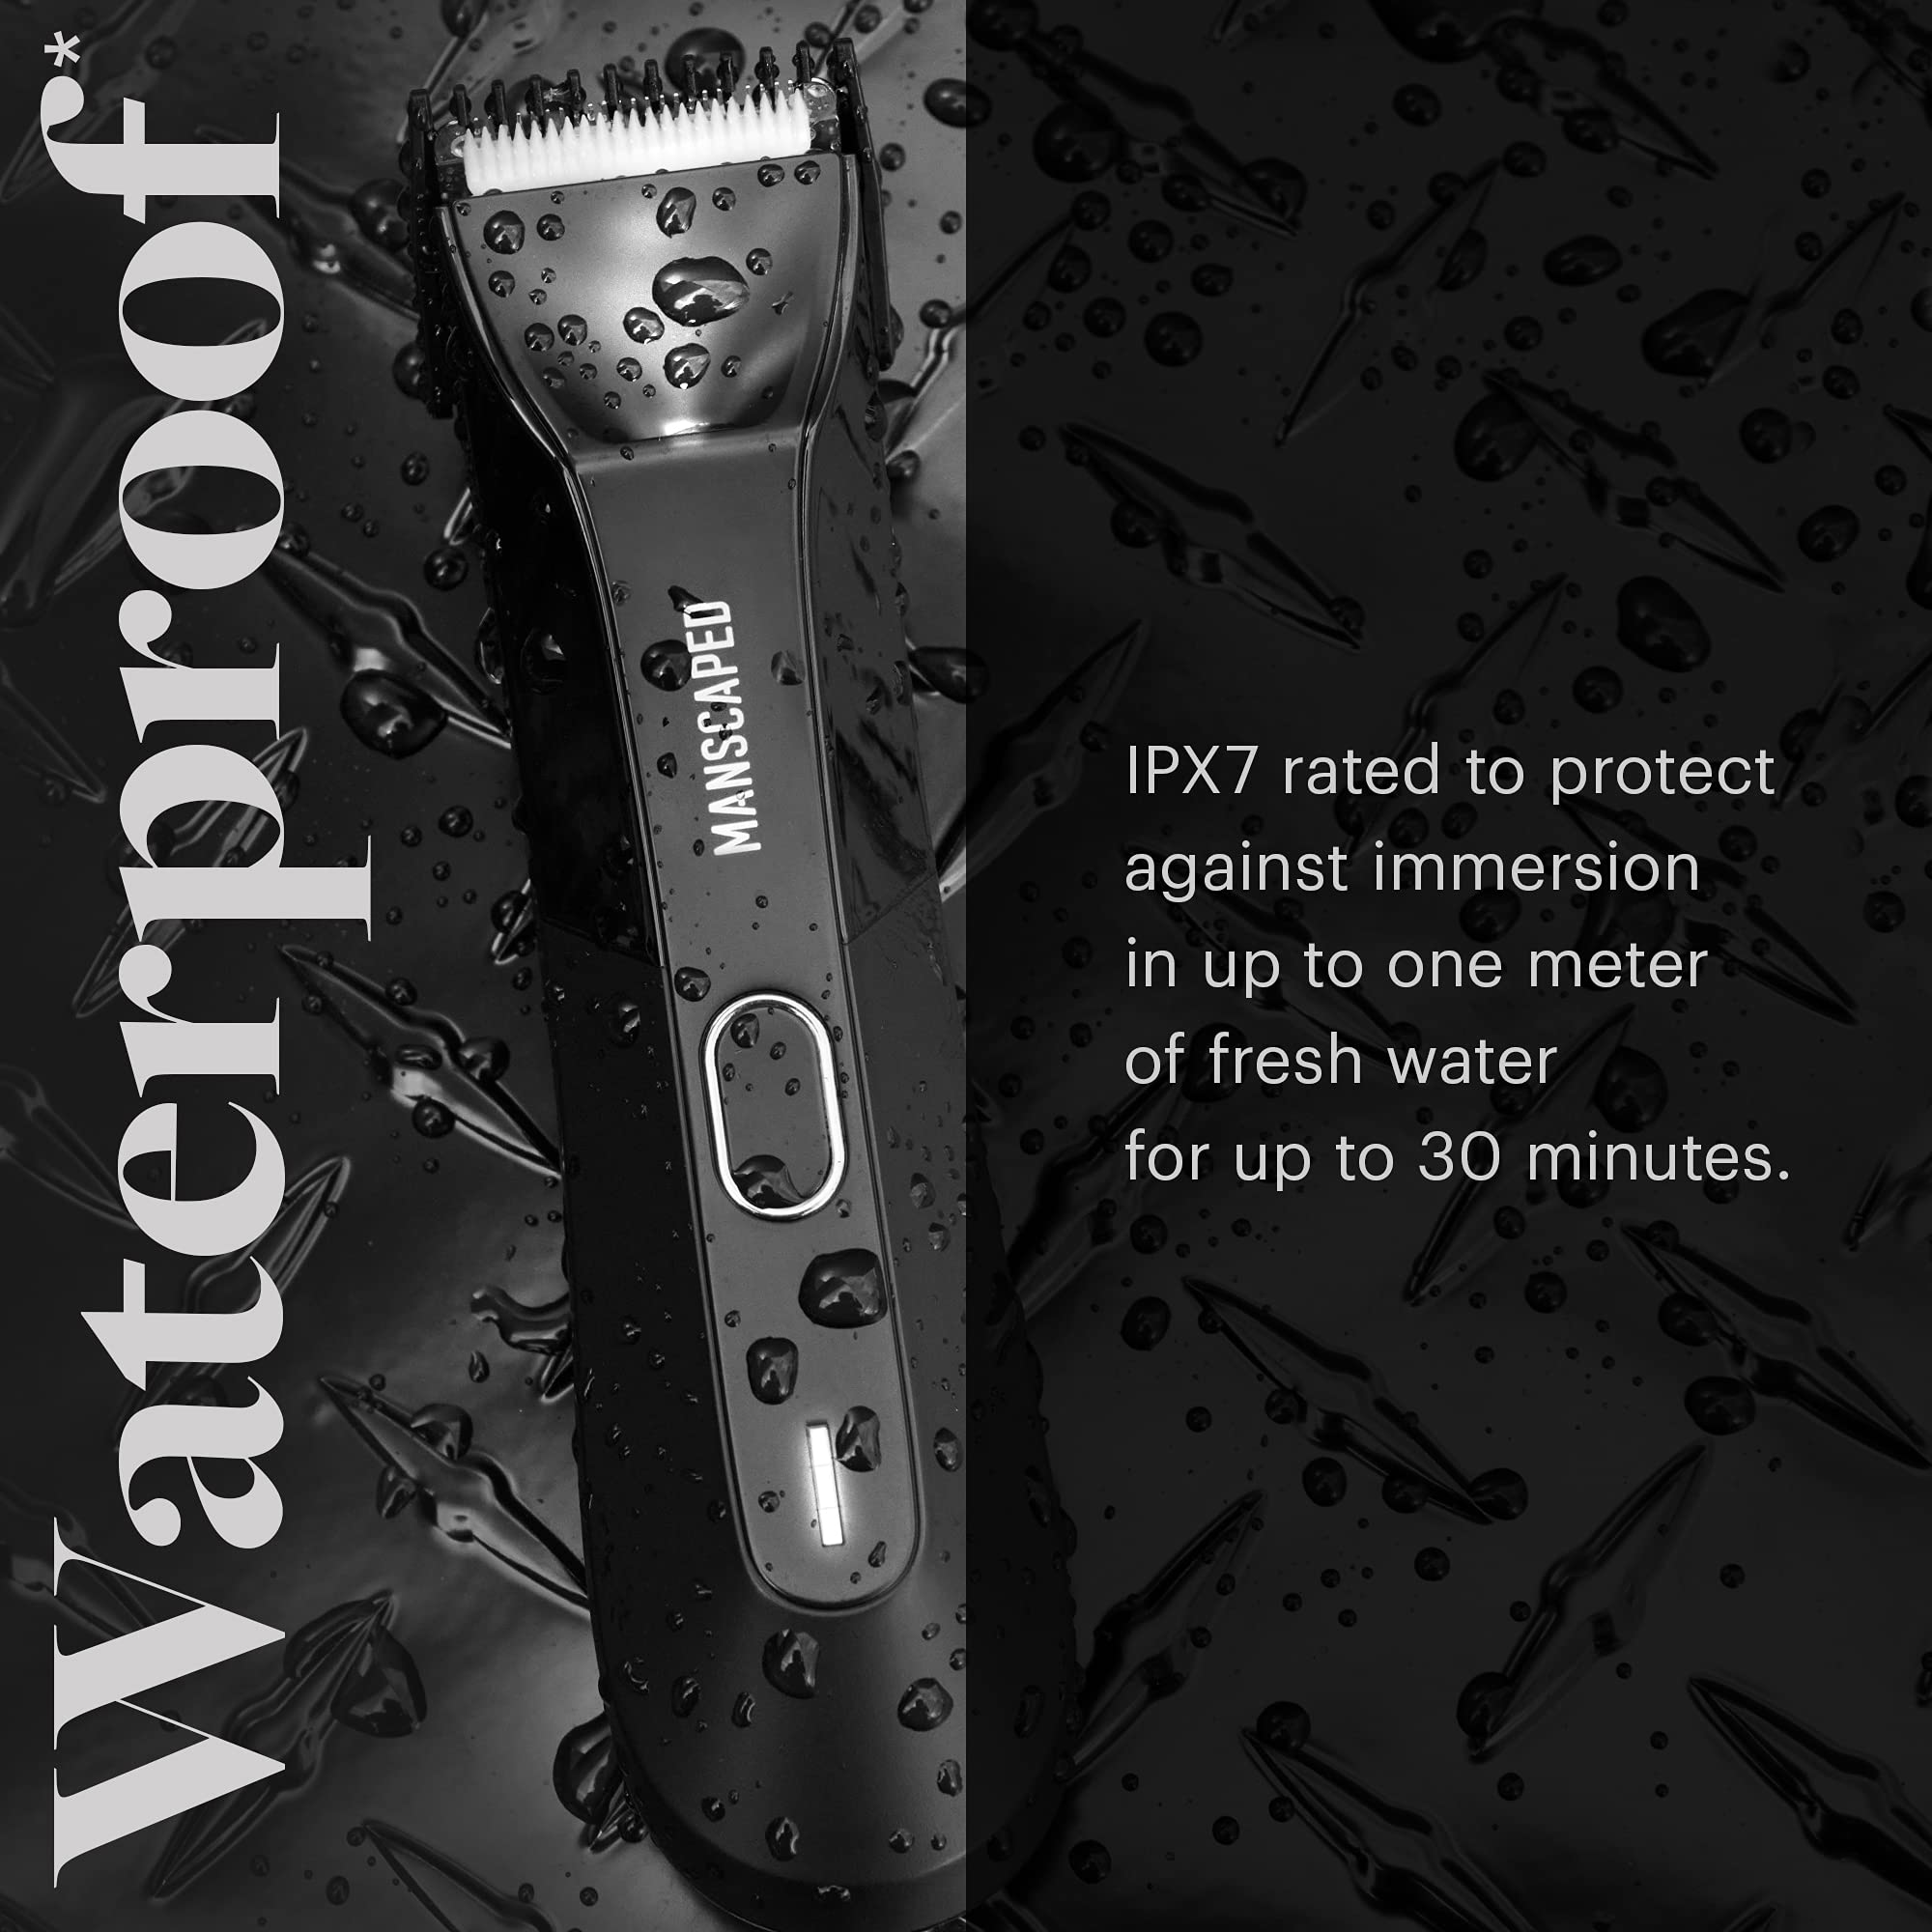 MANSCAPED® Electric Groin Hair Trimmer, The Lawn Mower™ 4.0, Replaceable SkinSafe™ Ceramic Blade Heads, Waterproof Wet/Dry Clippers, Rechargeable, Wireless Charging, Ultimate Male Hygiene Razor